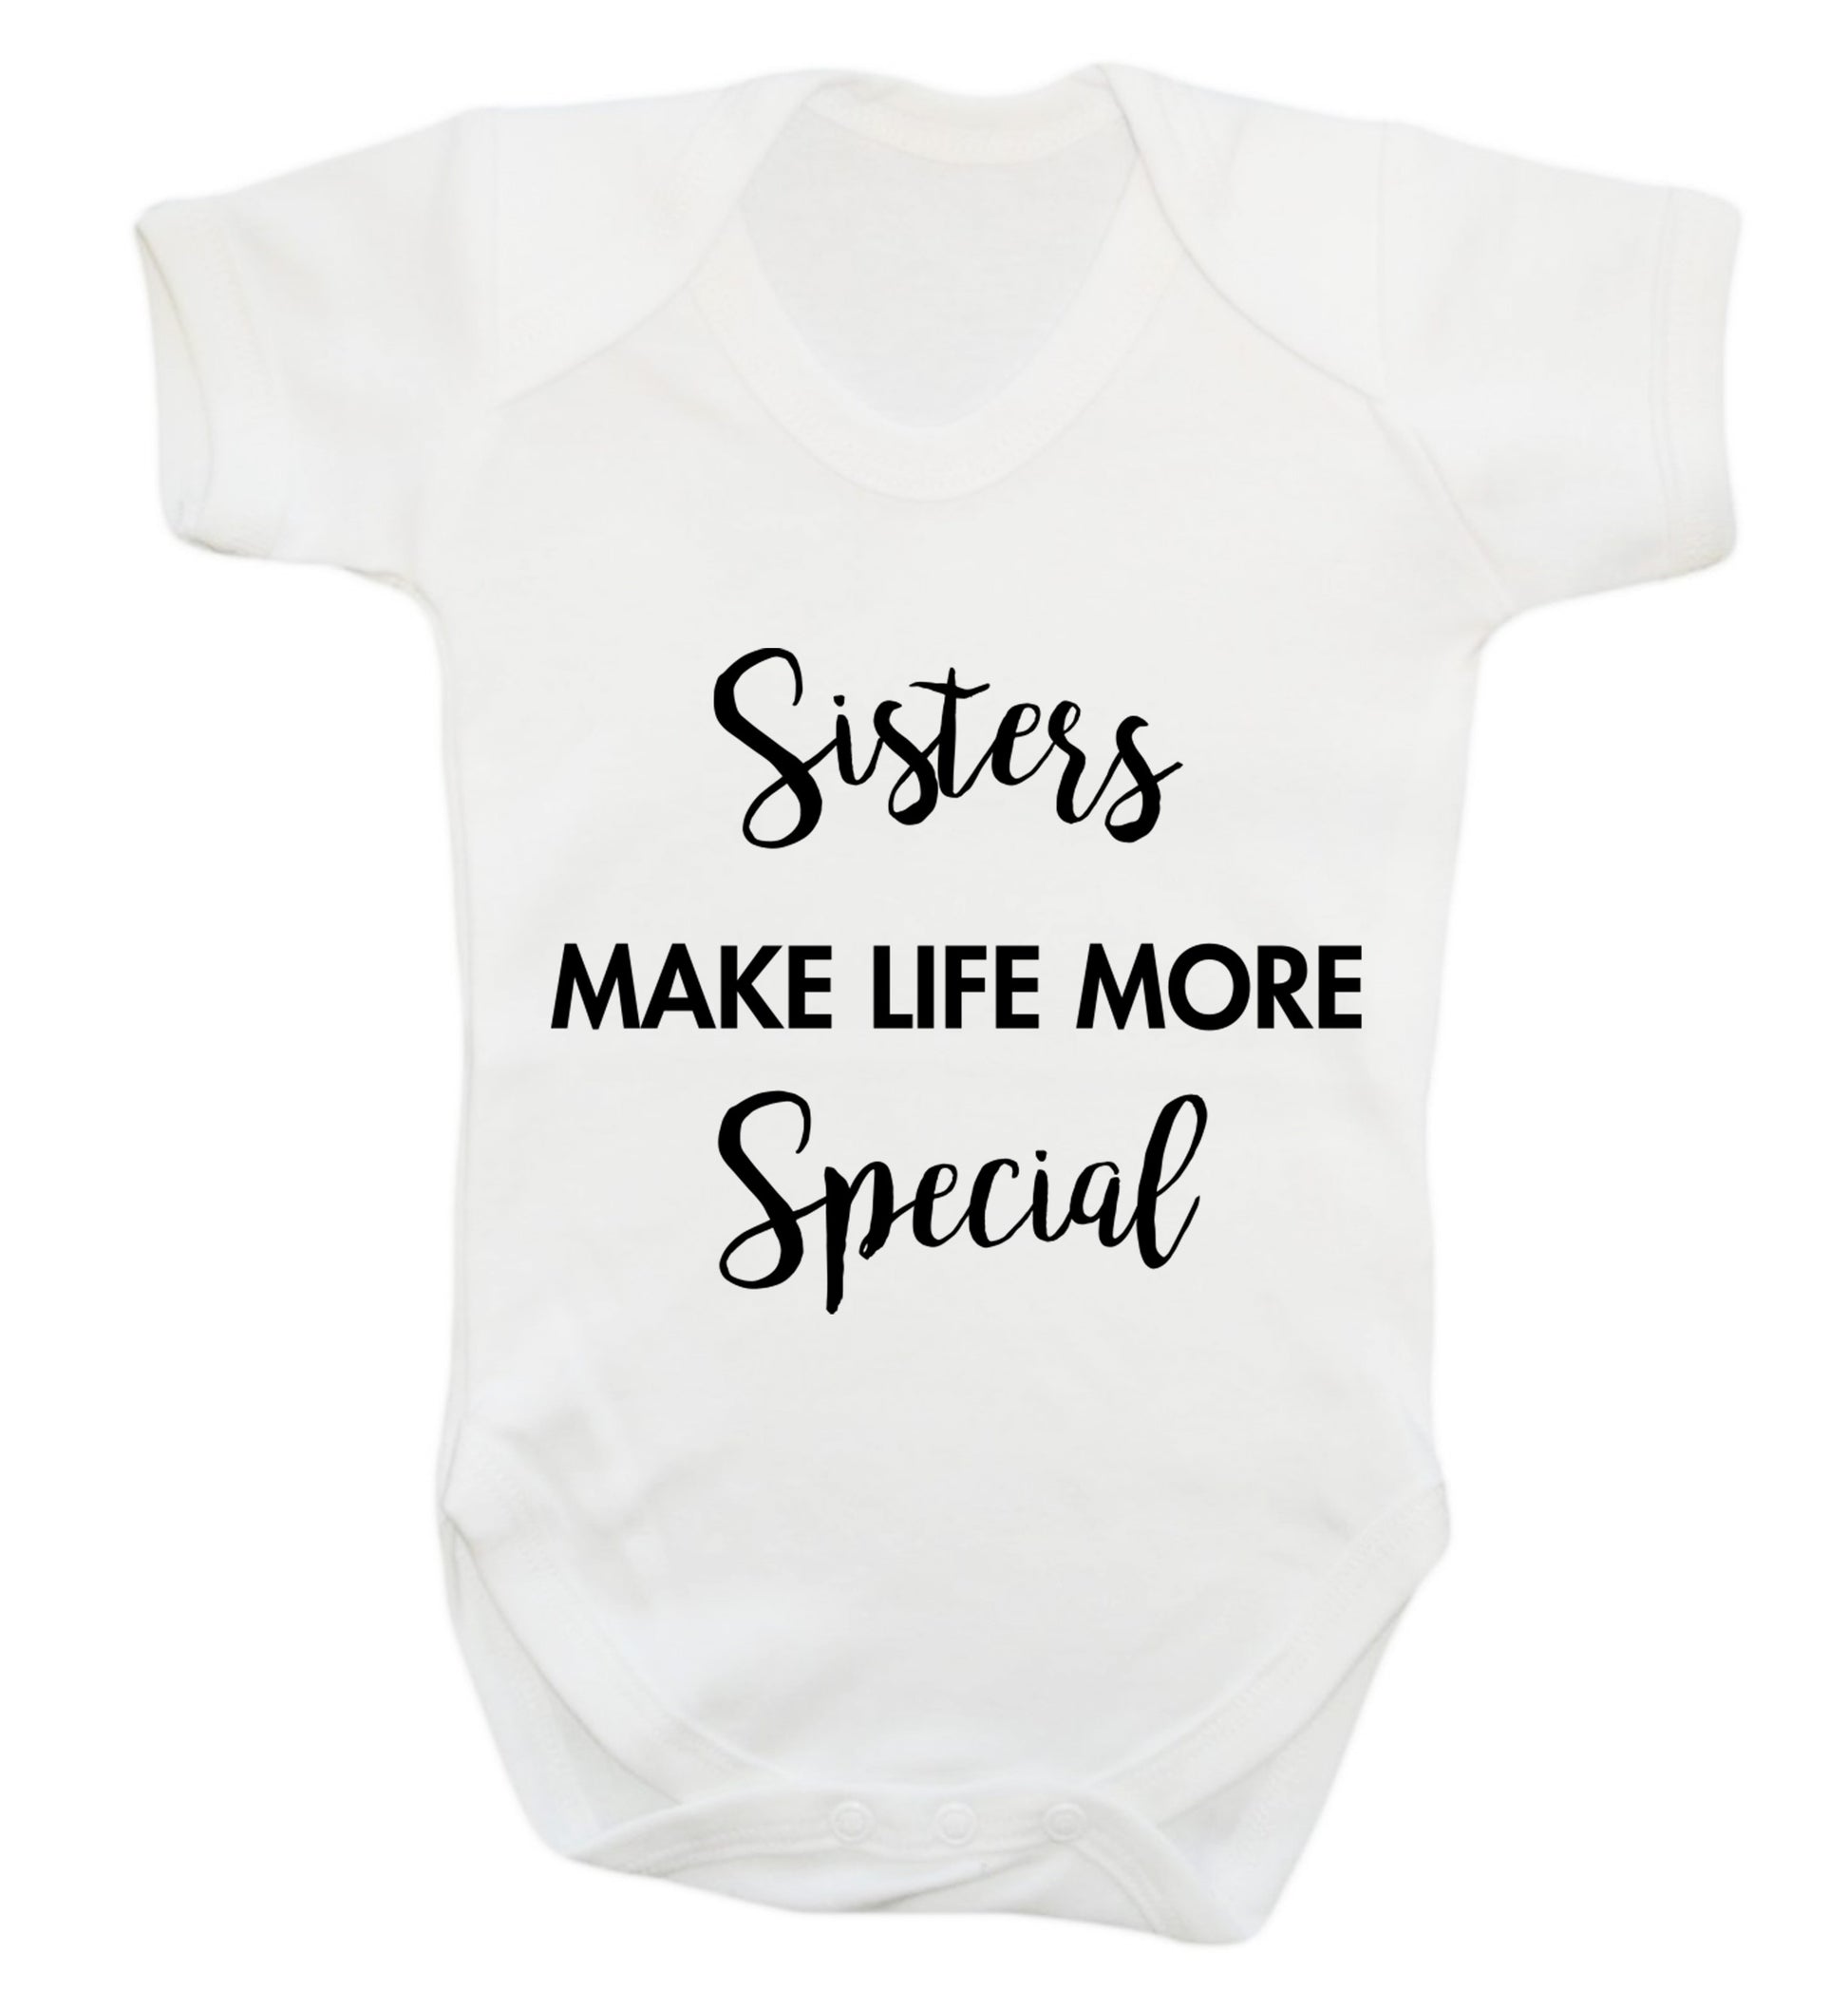 Sisters make life more special Baby Vest white 18-24 months